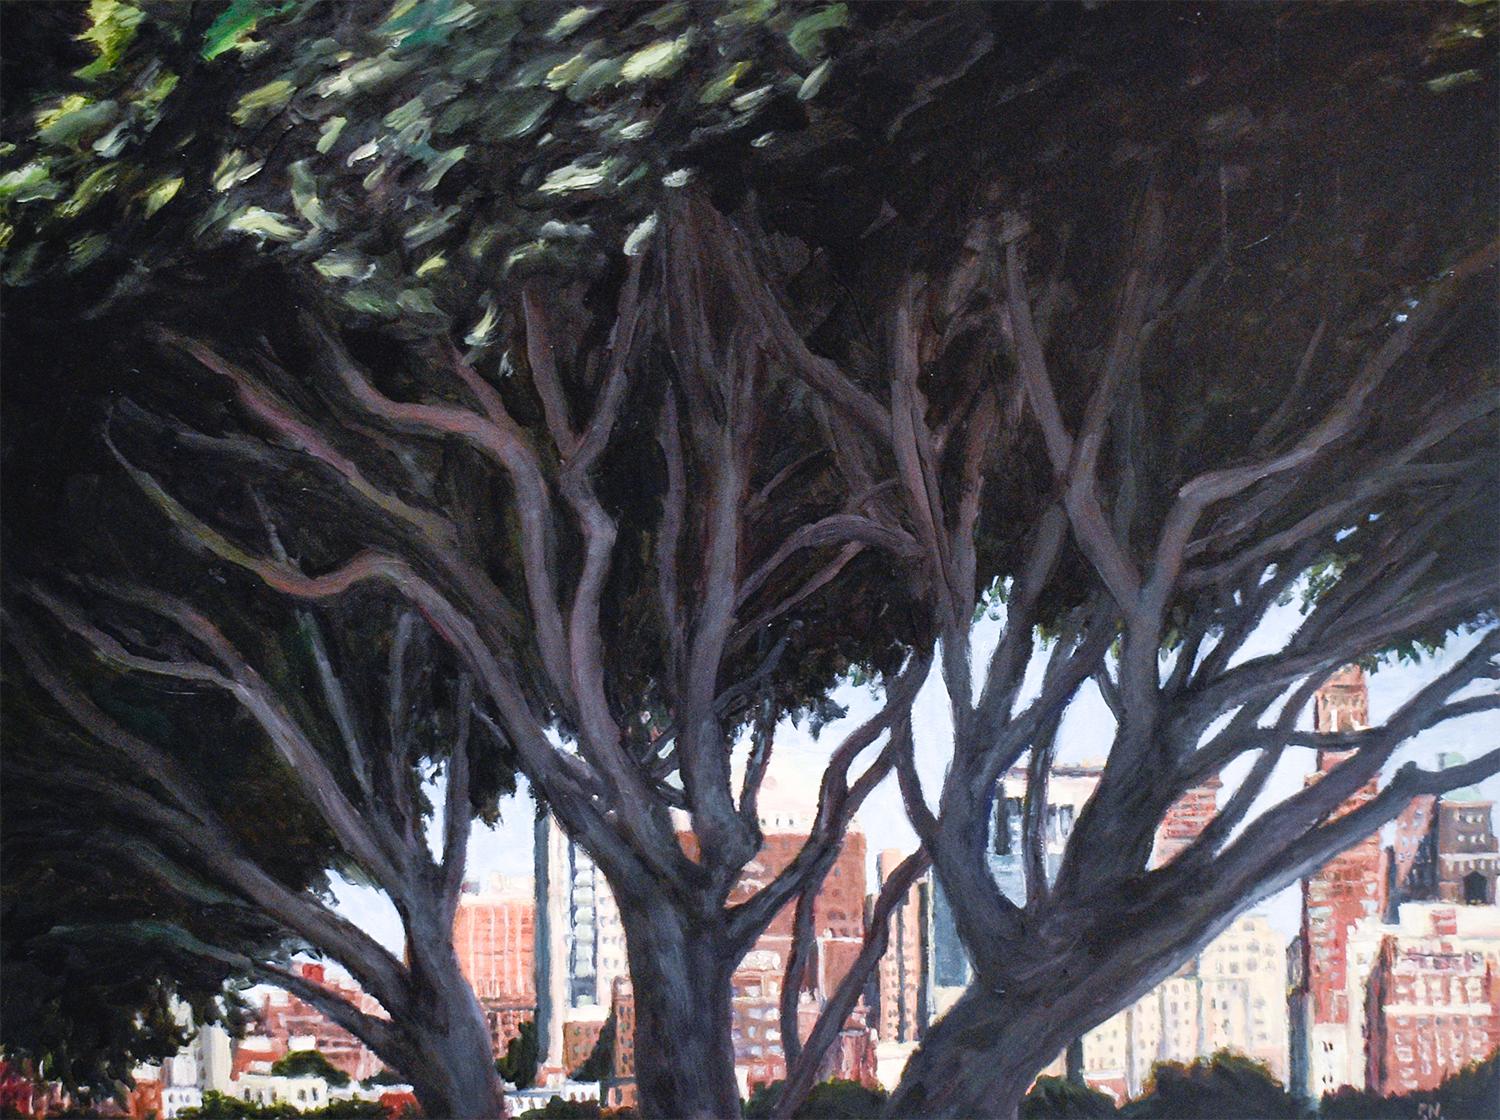 Brooklyn Through the Trees: Modern, Realist New York City Landscape Painting